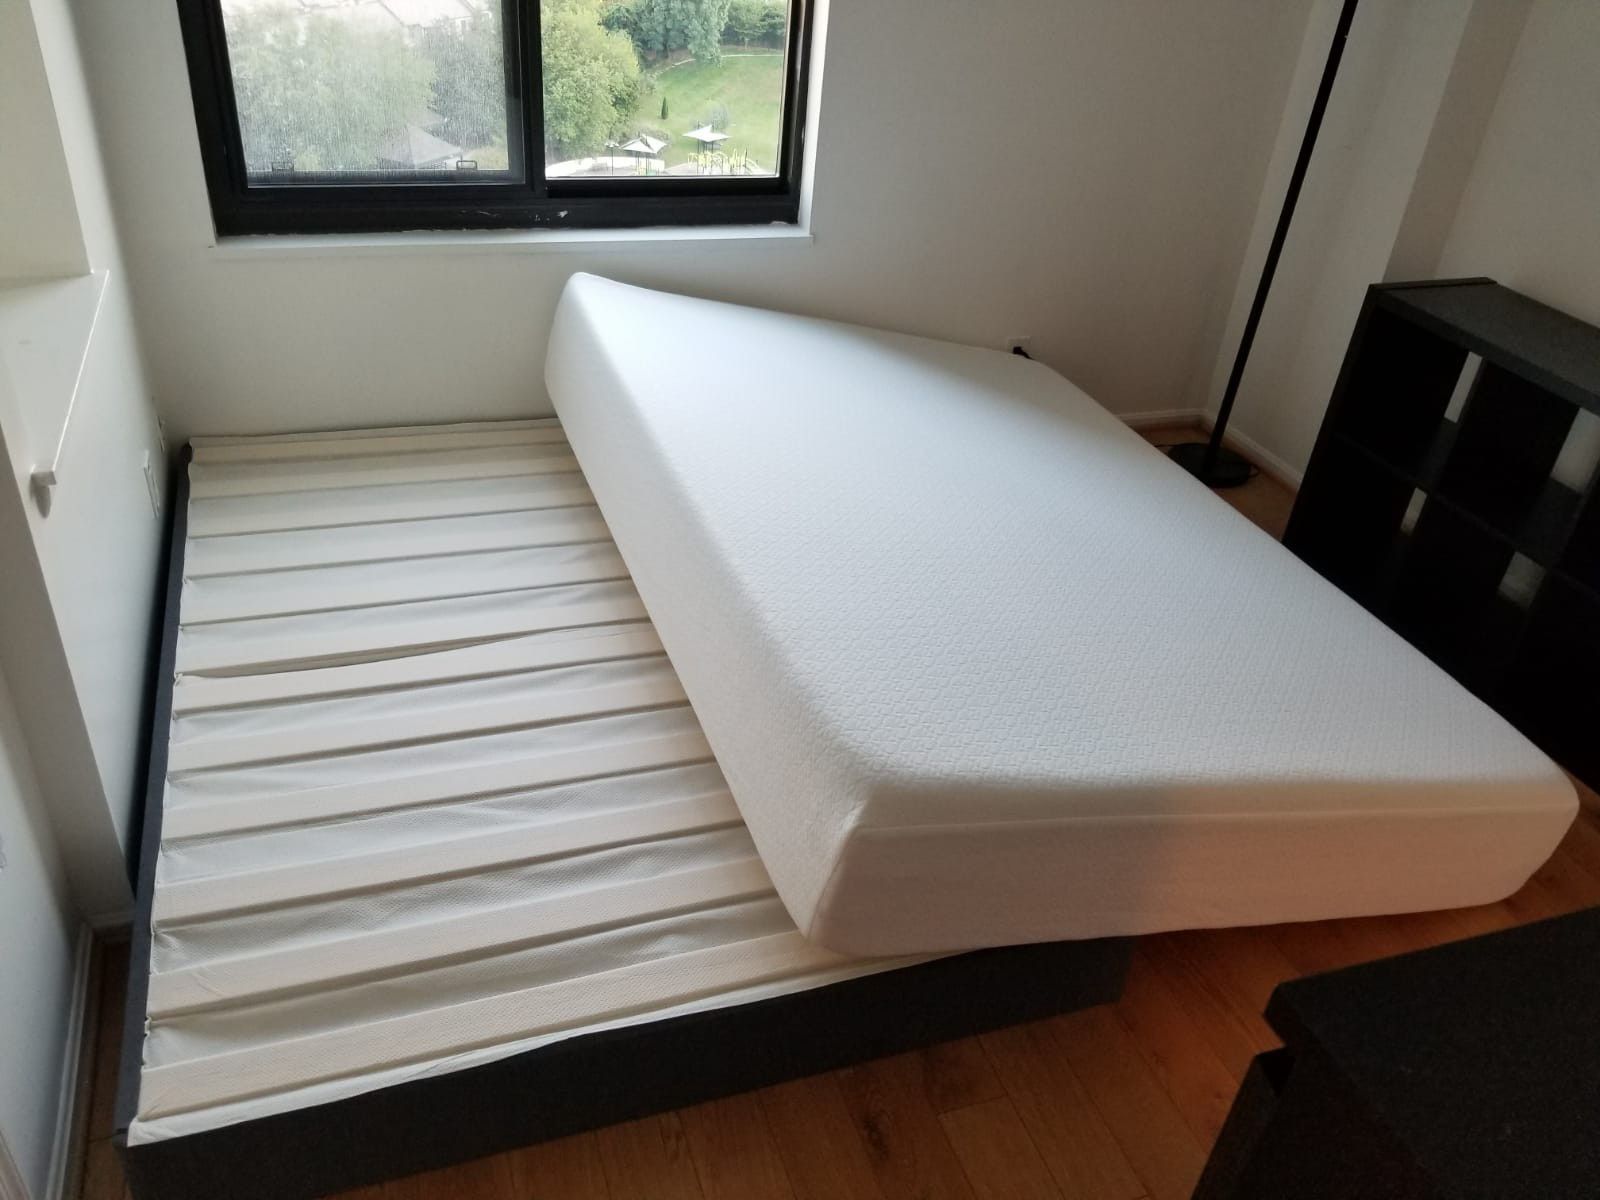 Queen size memory foam mattress with the box spring